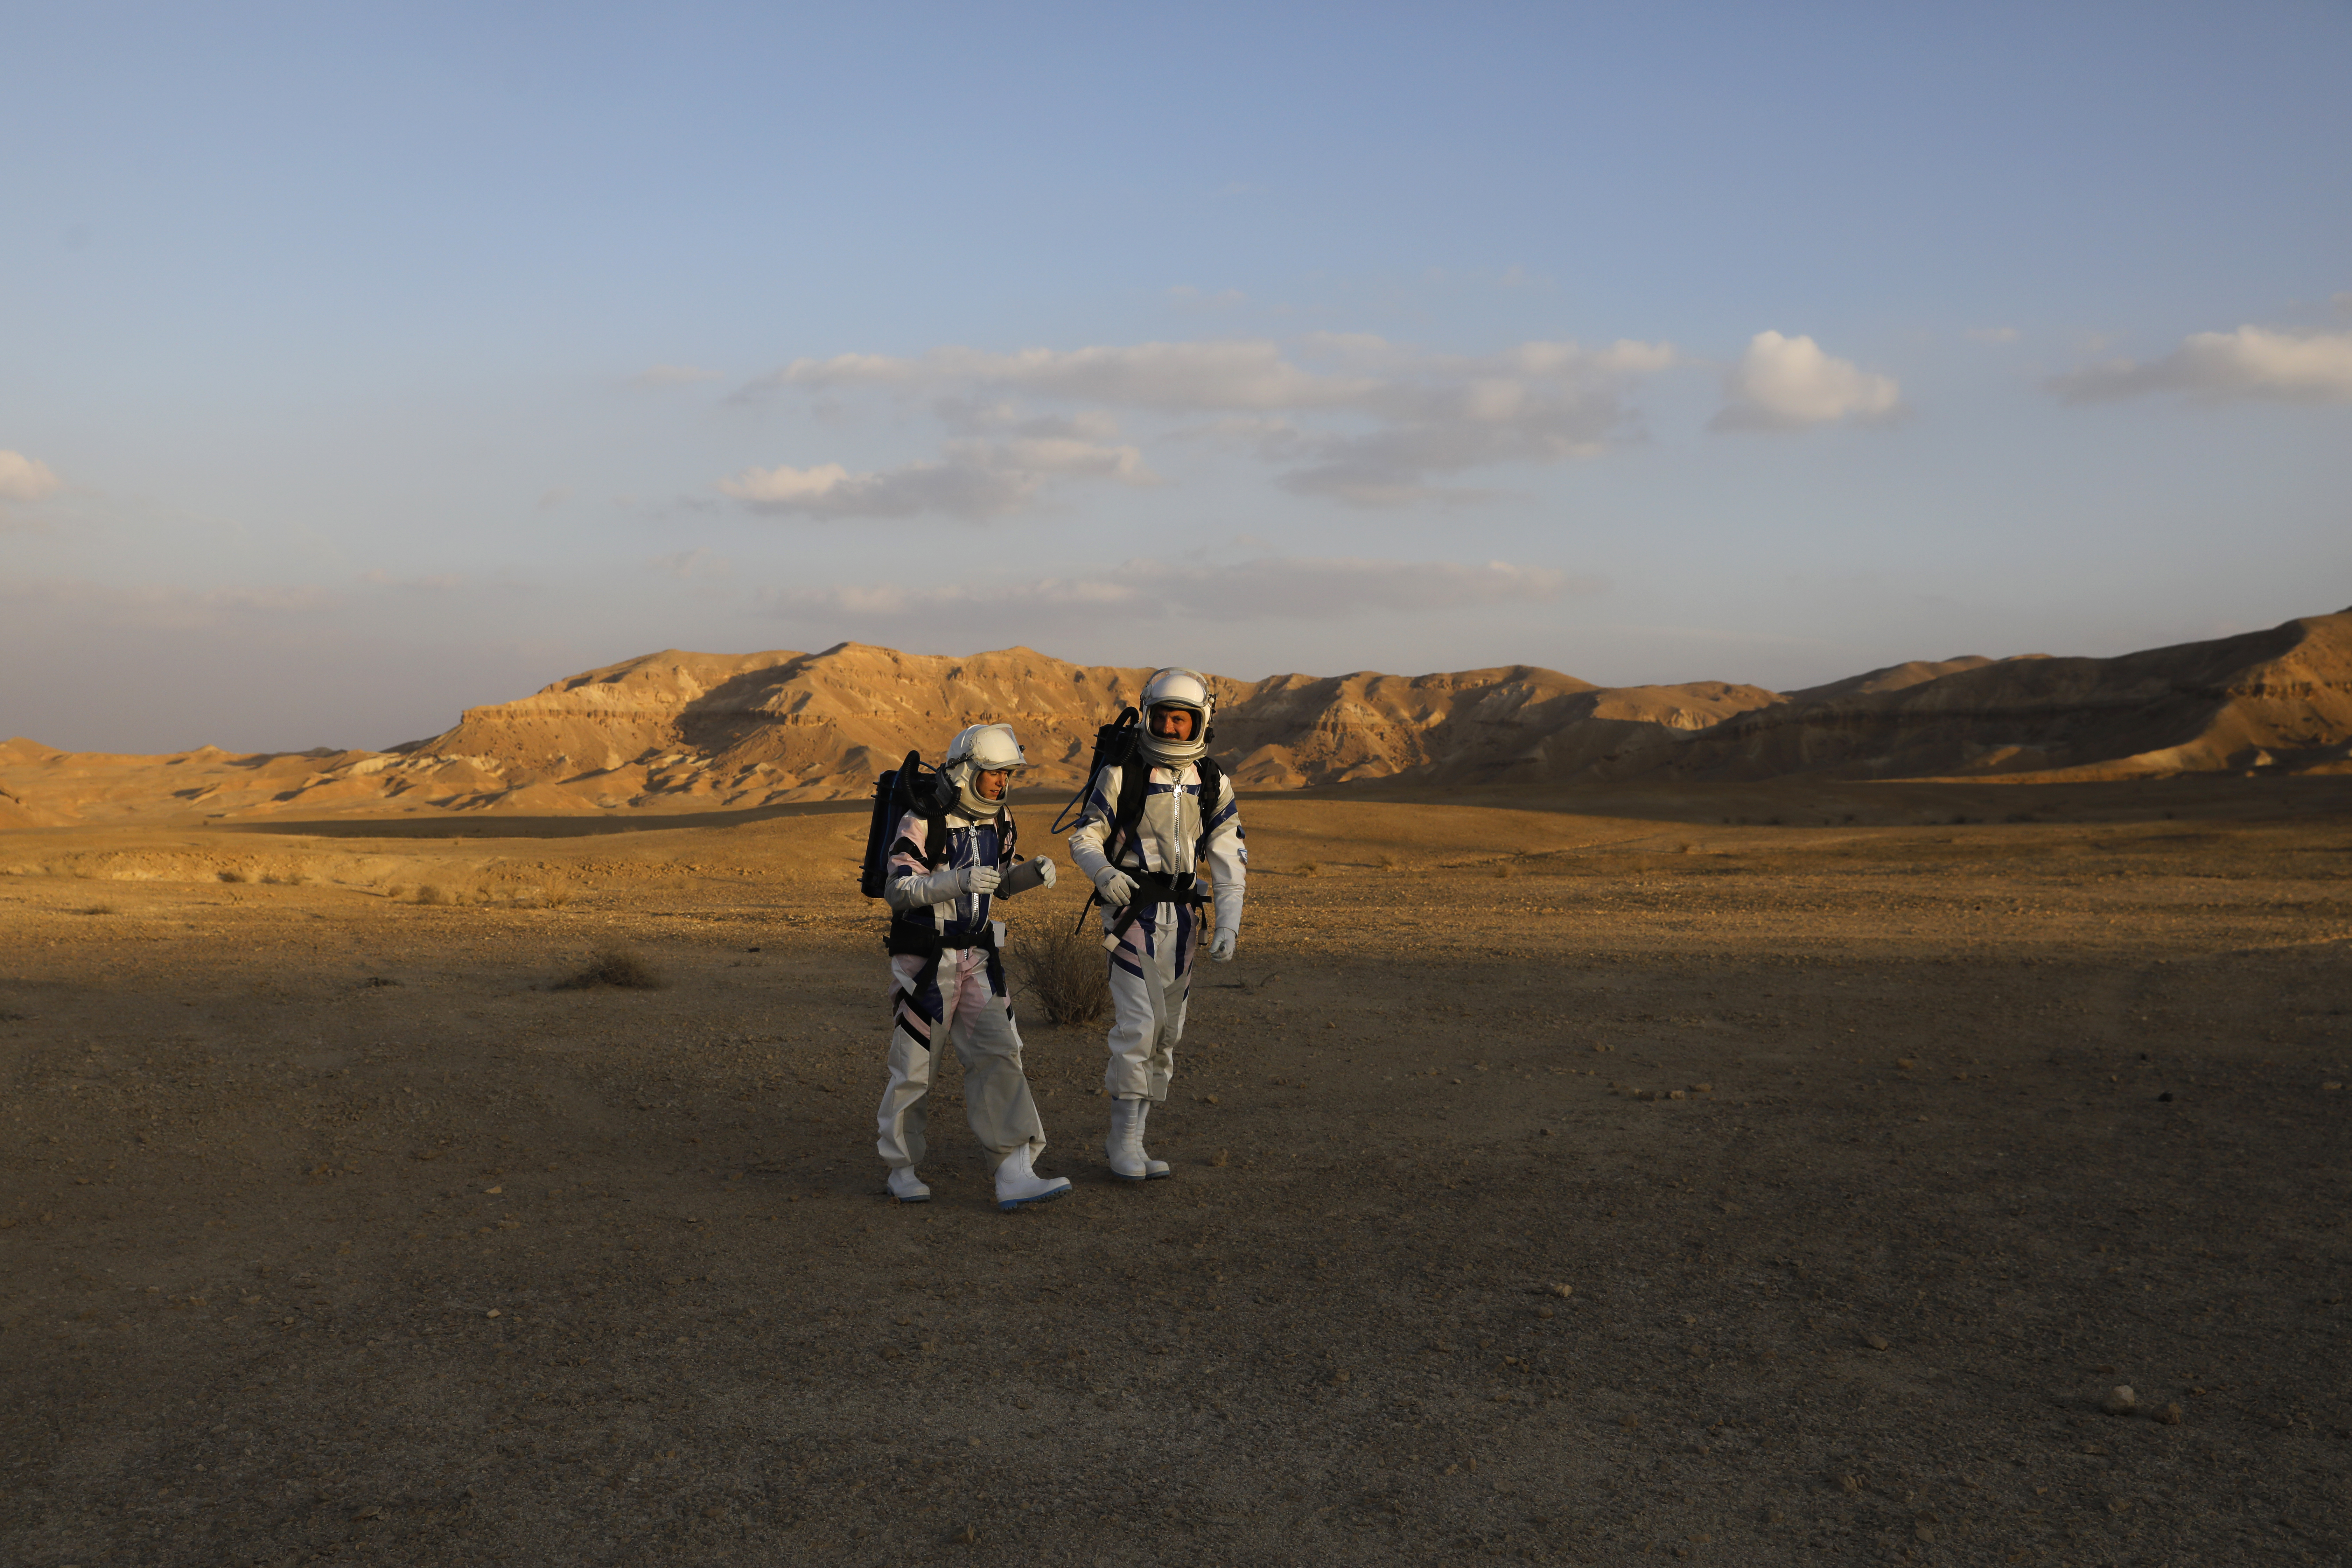 Israeli analog astronauts start their mission on the D-MARS Project on February 18, 2018, in cooperation with the Israel Space Agency, which simulates life on Mars by performing several scientific experiments and staying in the D-MARS (Desert Mars Analog Ramon Station) which is built in an isolated desert area south of Mitzpe Ramon, in the Israeli Negev desert, chosen for its similarities to Mars in terms of geology, aridity, and isolation. / AFP PHOTO / MENAHEM KAHANA